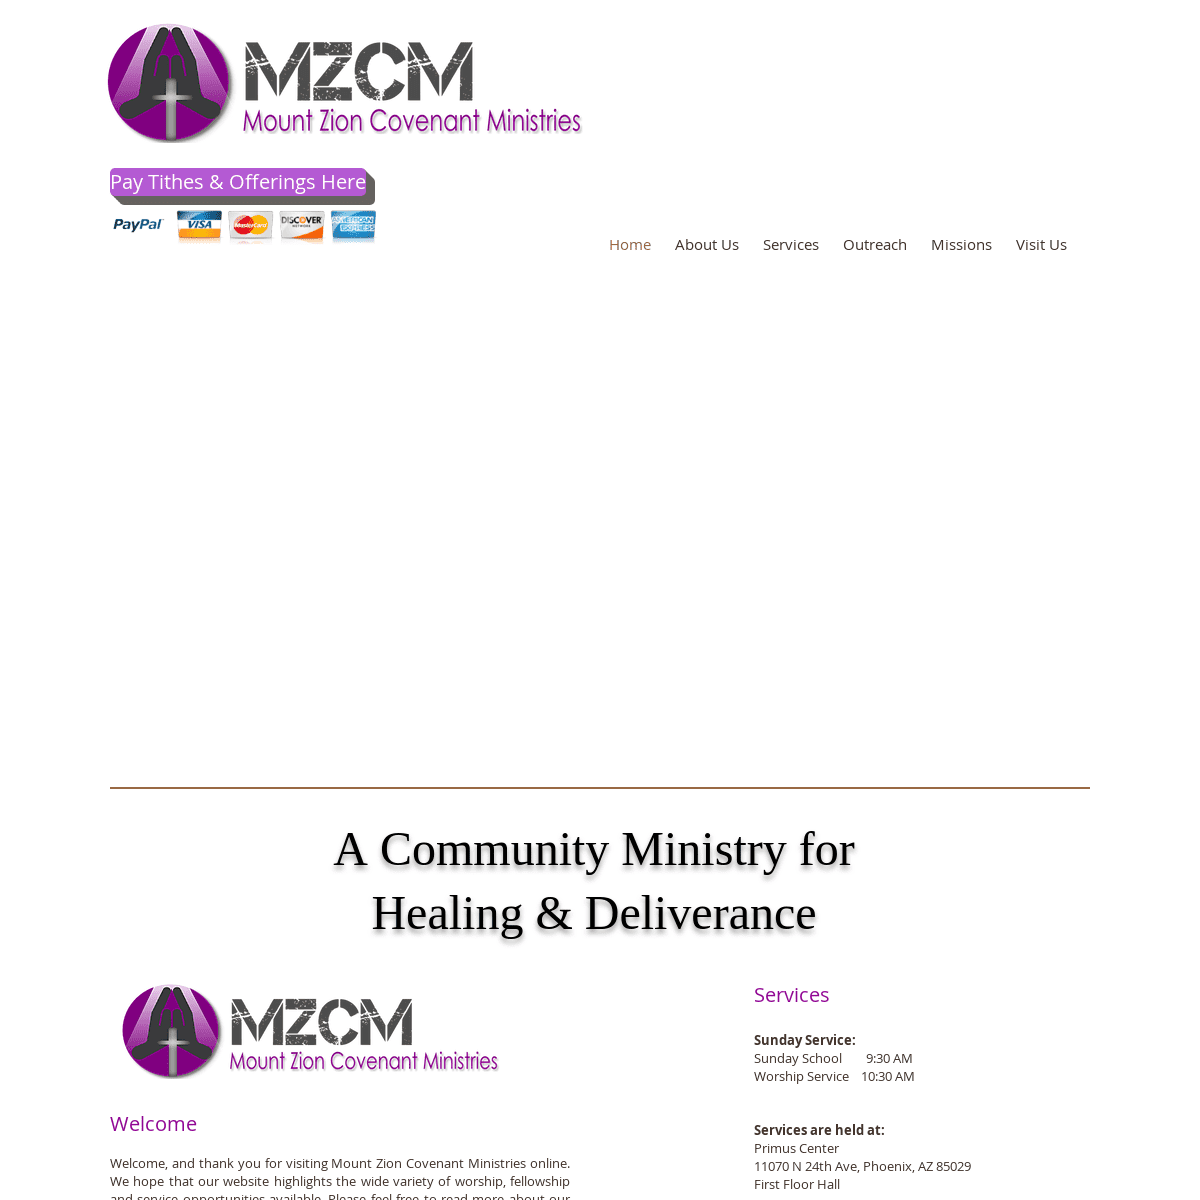 A complete backup of mzcm.org